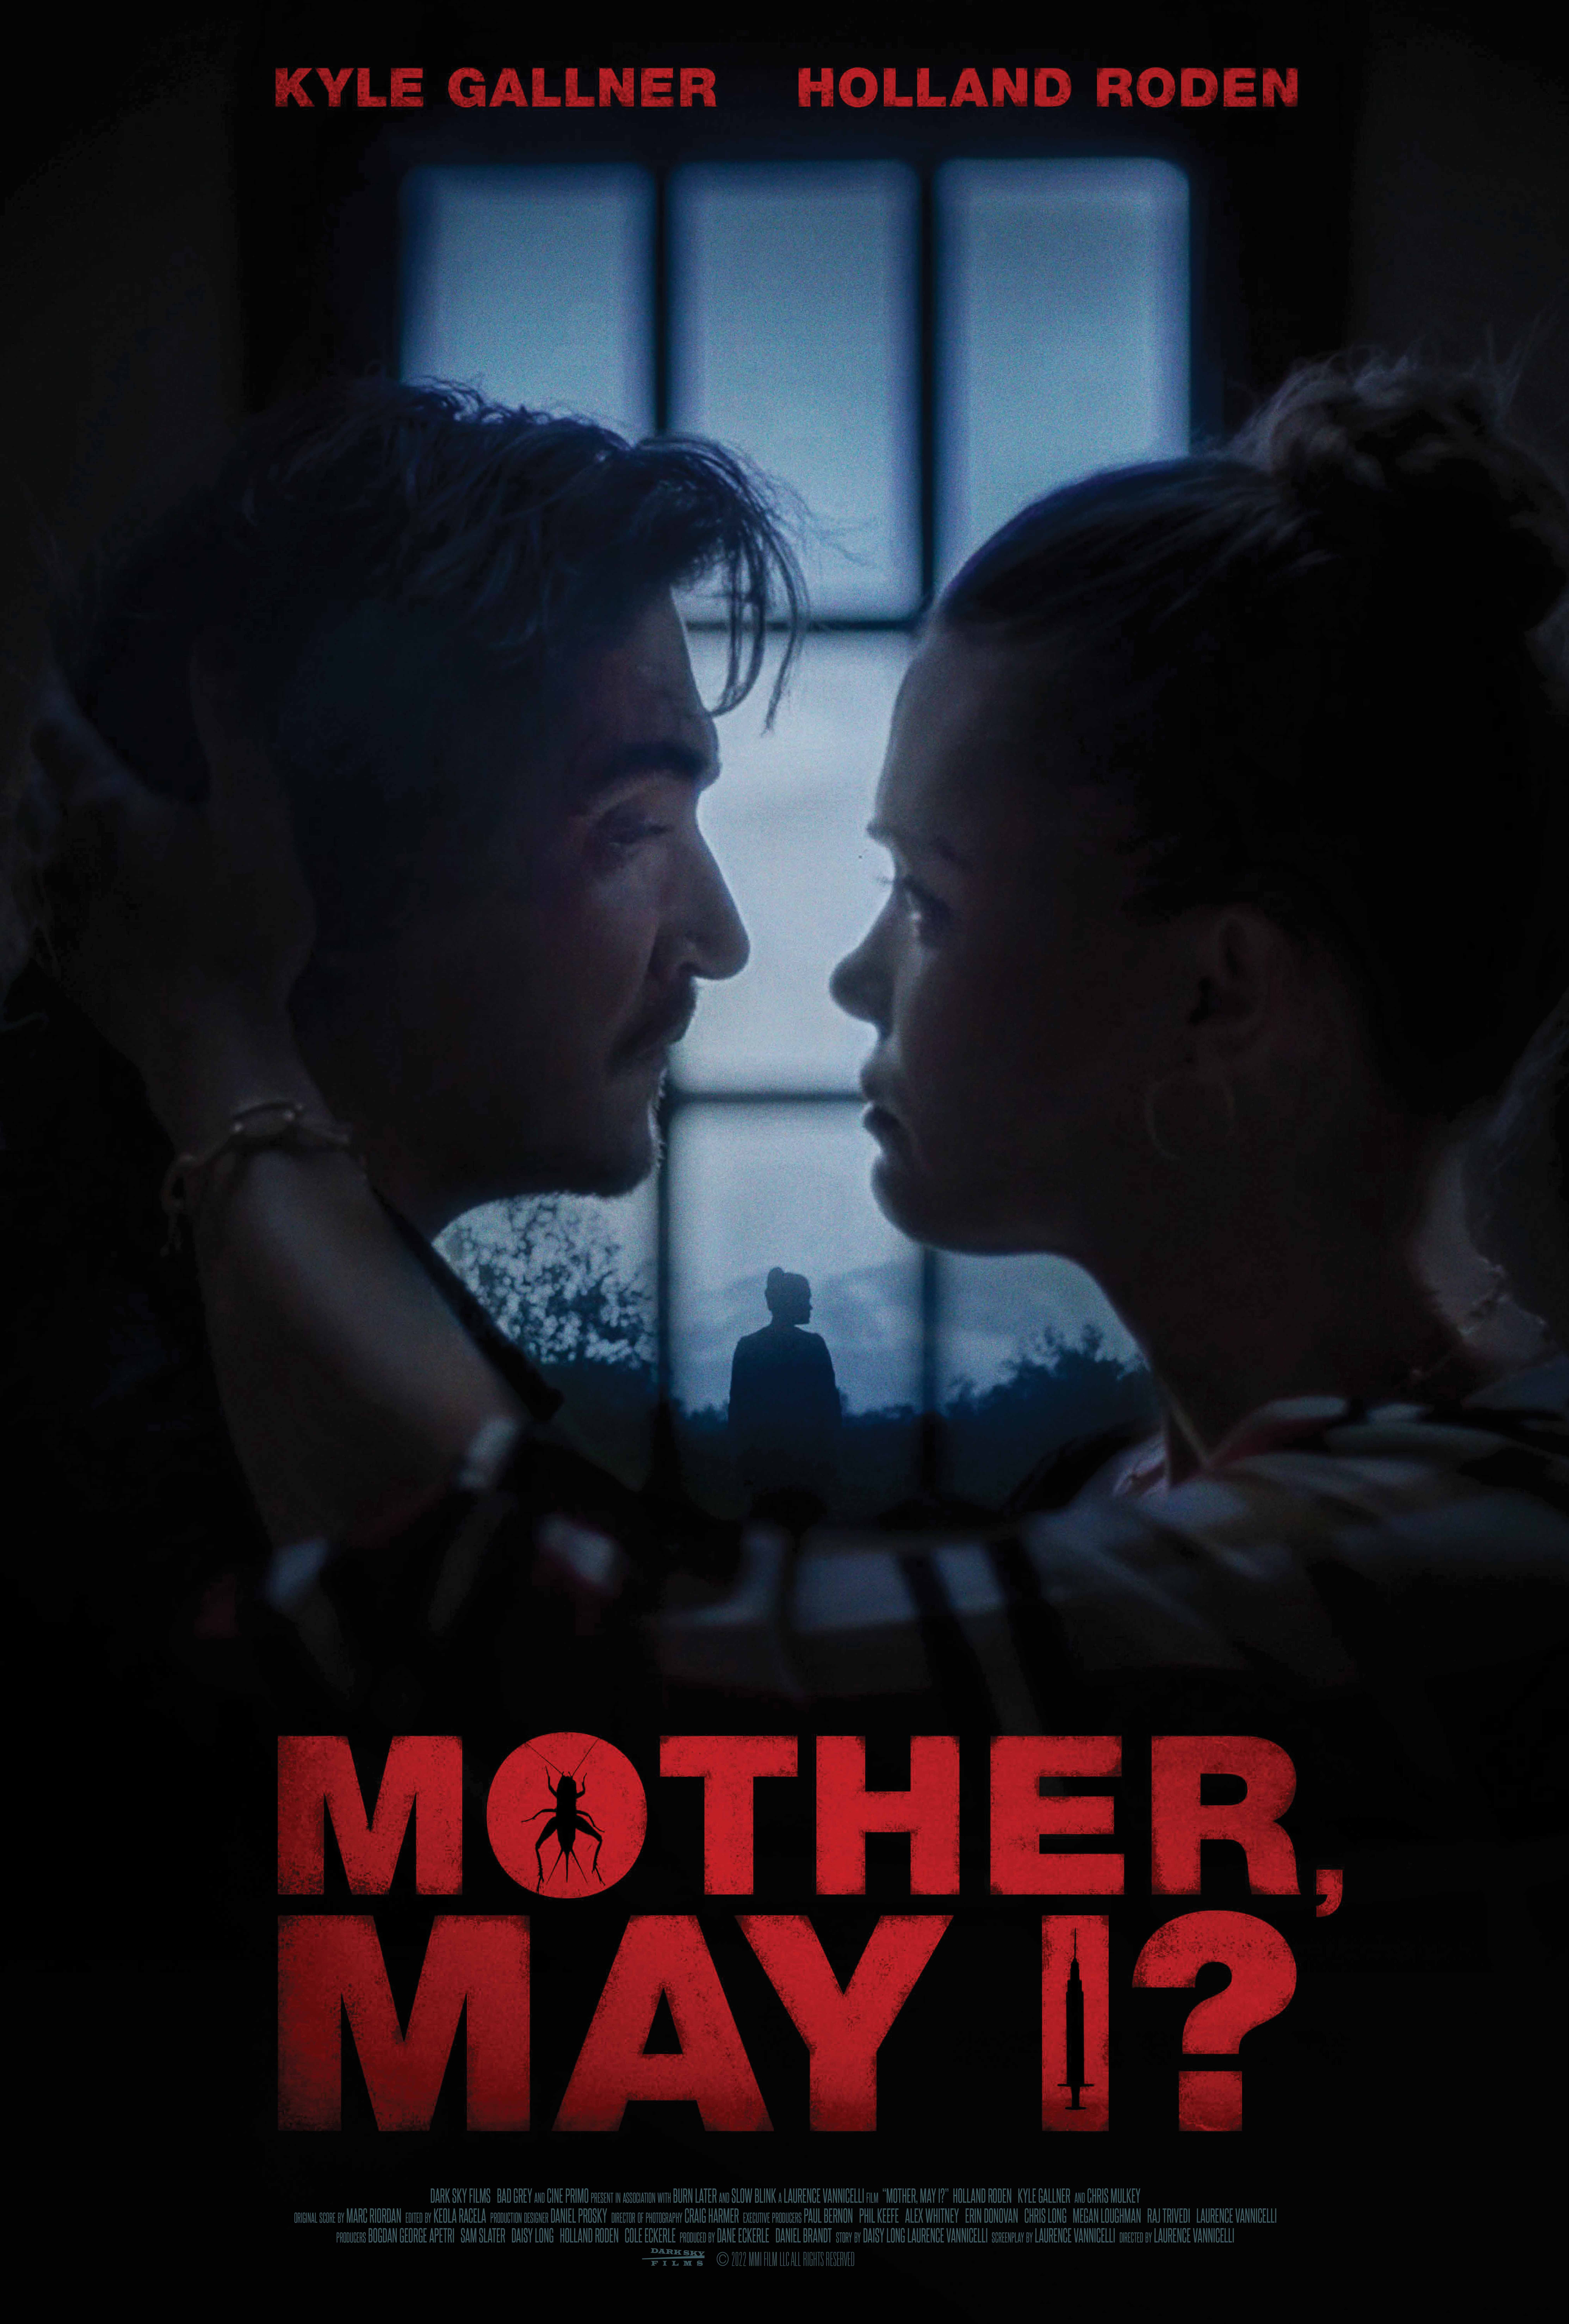 "Mother, May I?" - A Riveting Psychological Thriller Featuring Kyle Gallner and Holland Roden Set to Hit Theaters and VOD on July 21st 33